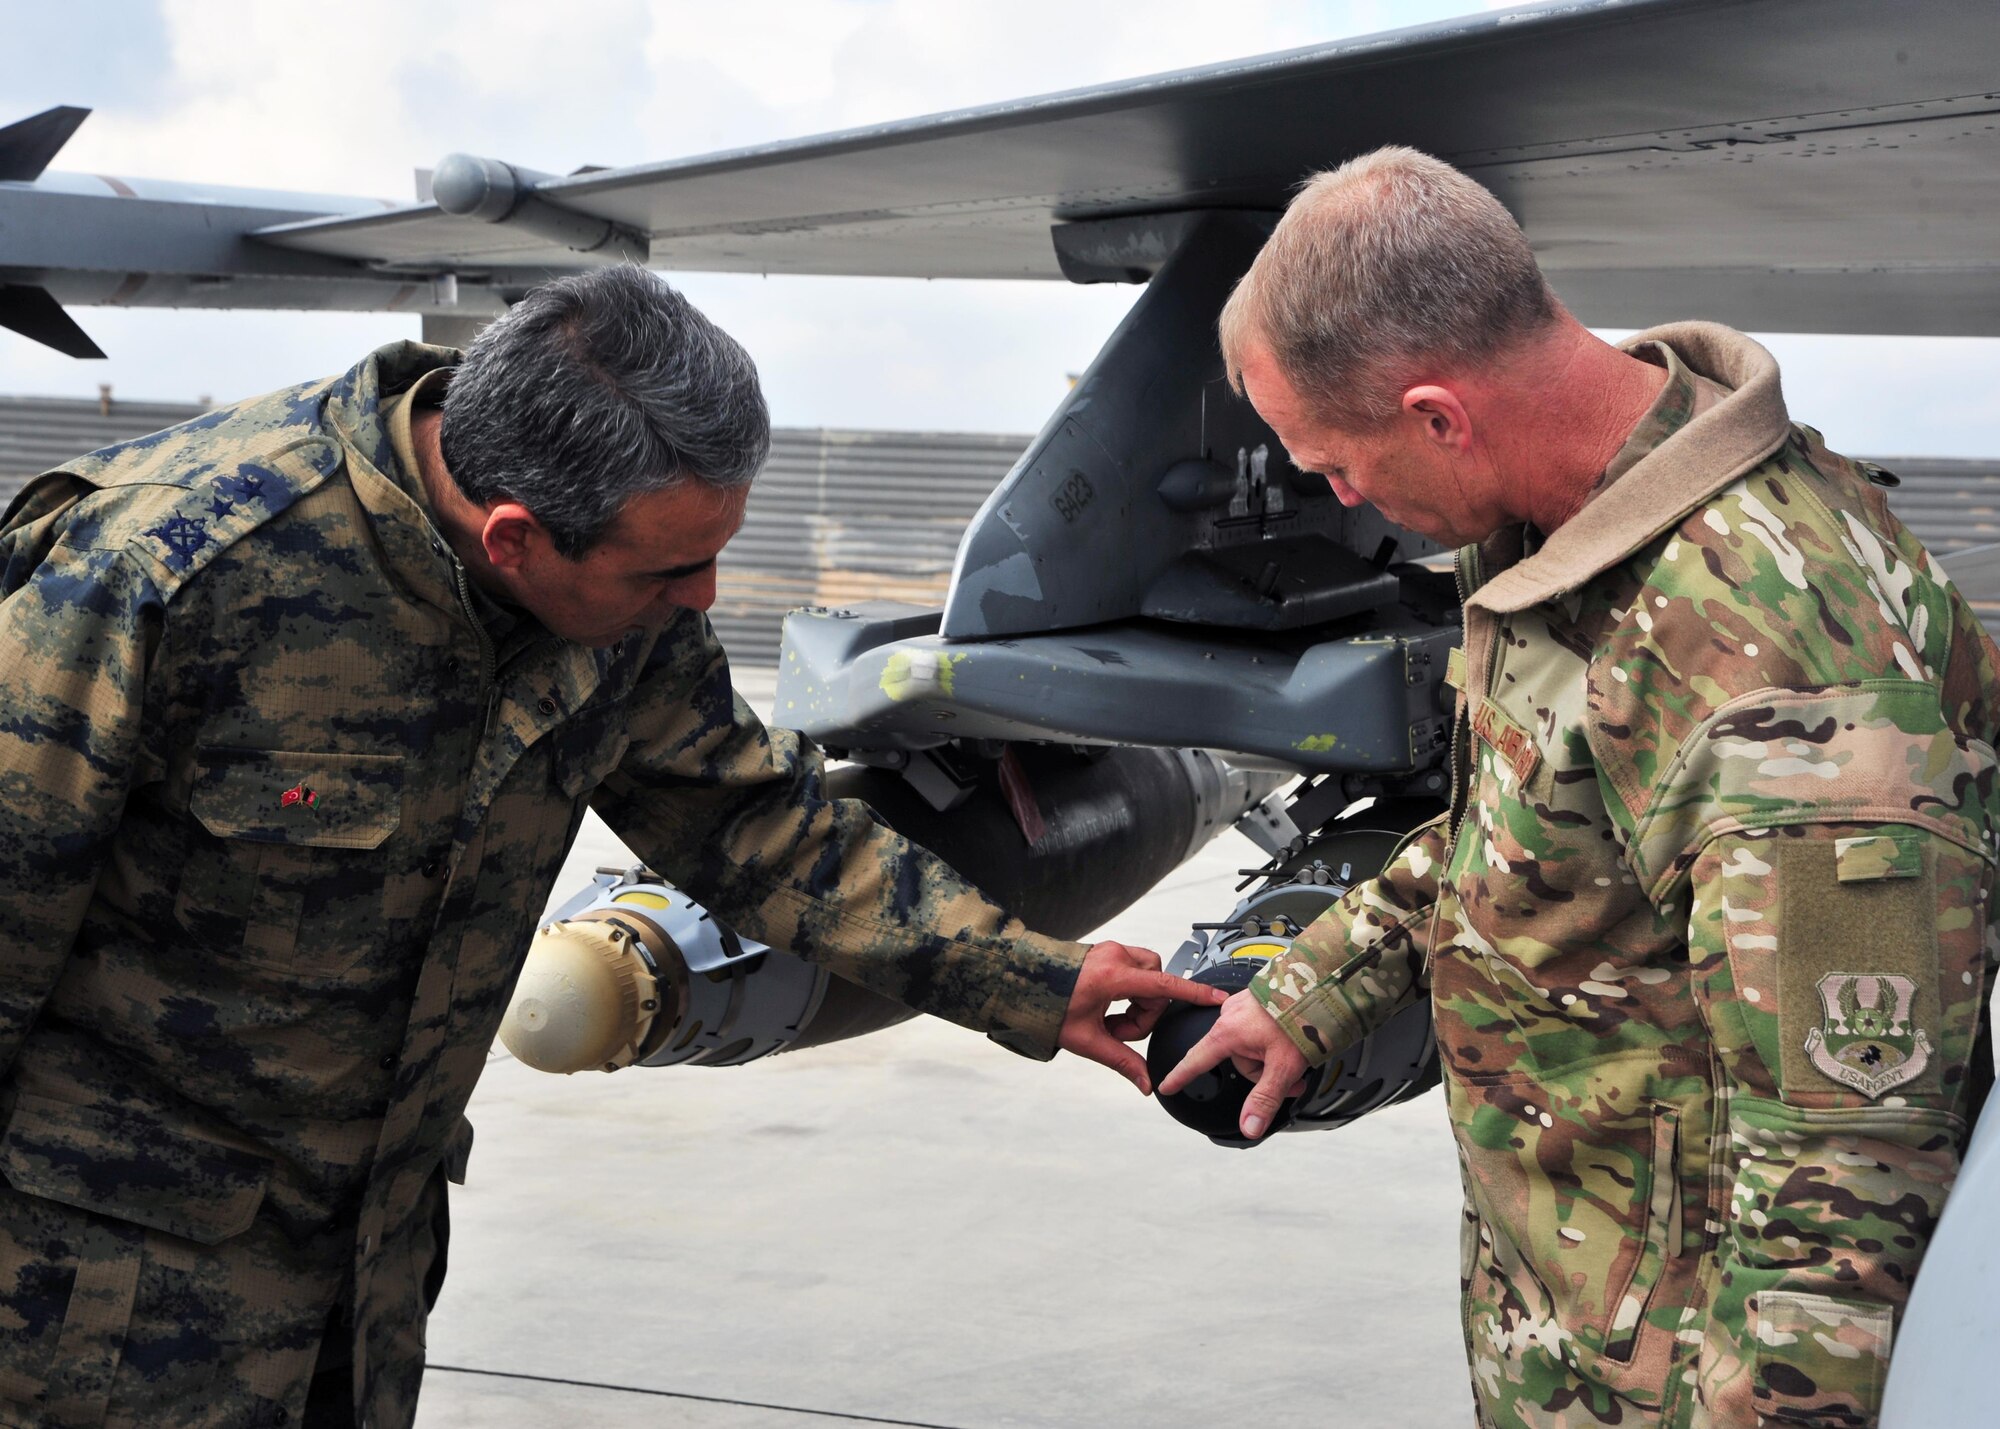 U.S. Air Force Brig. Gen. Mark Kelly, 455th Air Expeditionary Wing commander, and Air Force Maj. Gen.  Mehmet Cahit Bakir, Commander of Kabul International Airport, examine munitions on an F-16 Fighting Falcon during a tour Jan. 22, 2015 at Bagram Airfield, Afghanistan. During the tour, Bakir had the opportunity to meet with 455th Air Expeditionary Wing leadership and become better acquainted with Air Force assets and squadrons here. (U.S. Air Force photo by Staff Sgt. Whitney Amstutz/released)